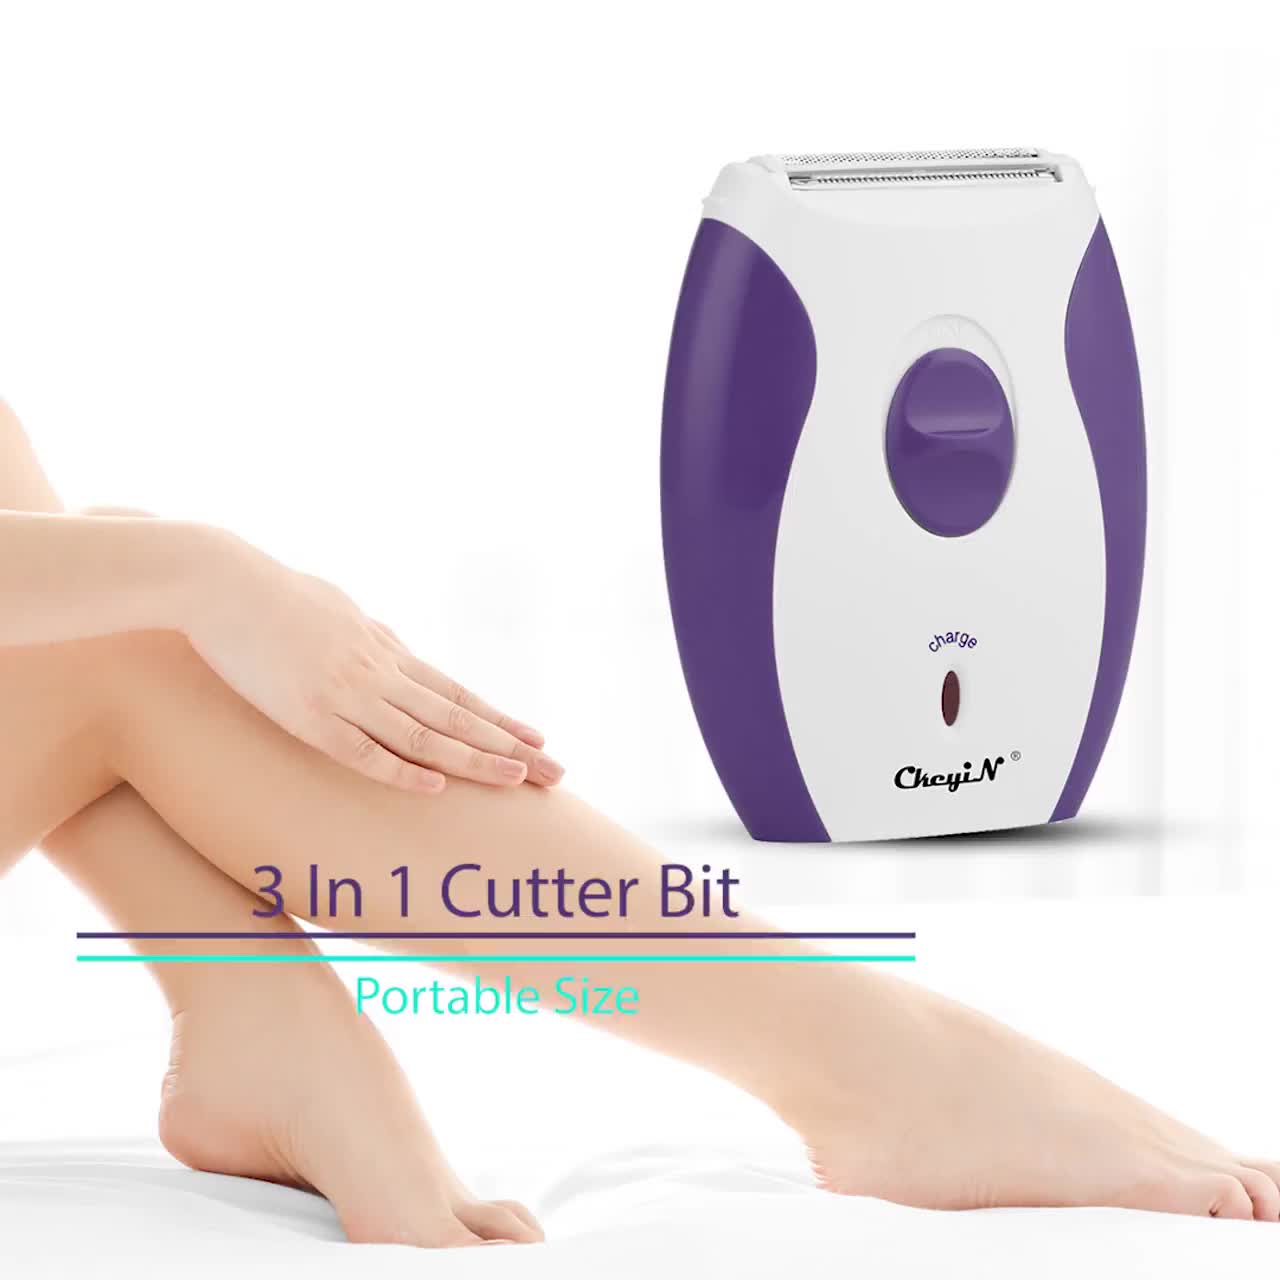 ckeyin-mini-hair-removal-electric-body-groomer-portable-razor-hair-trimmer-rechargeable-shaver